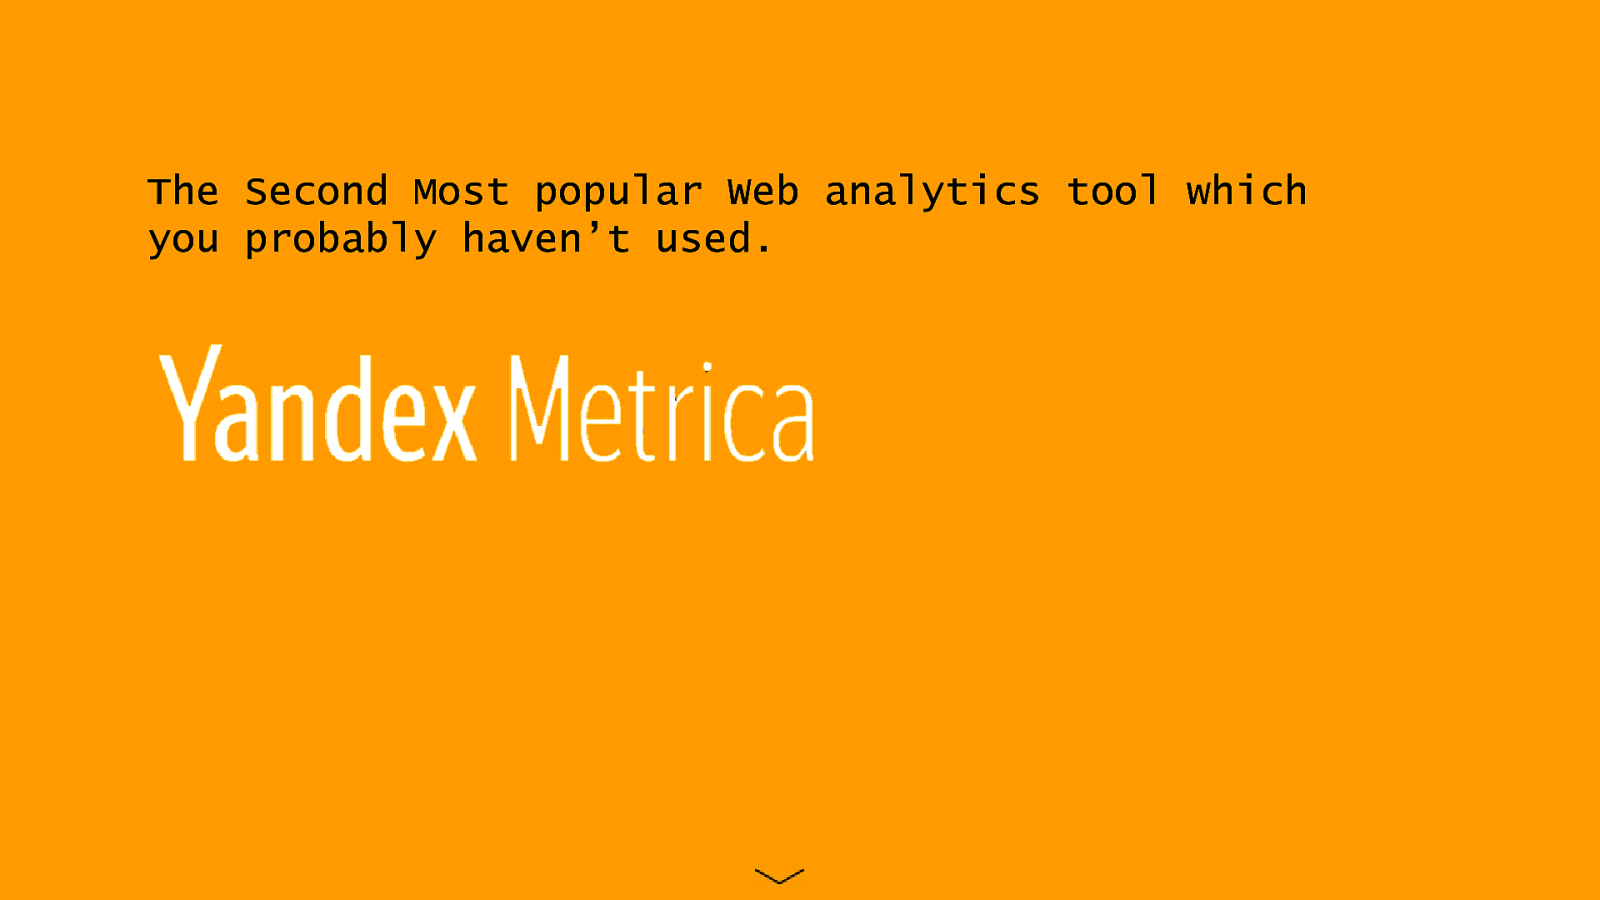 Yandex Metrica - The Second Most popular Web analytics tool which you probably haven’t used.